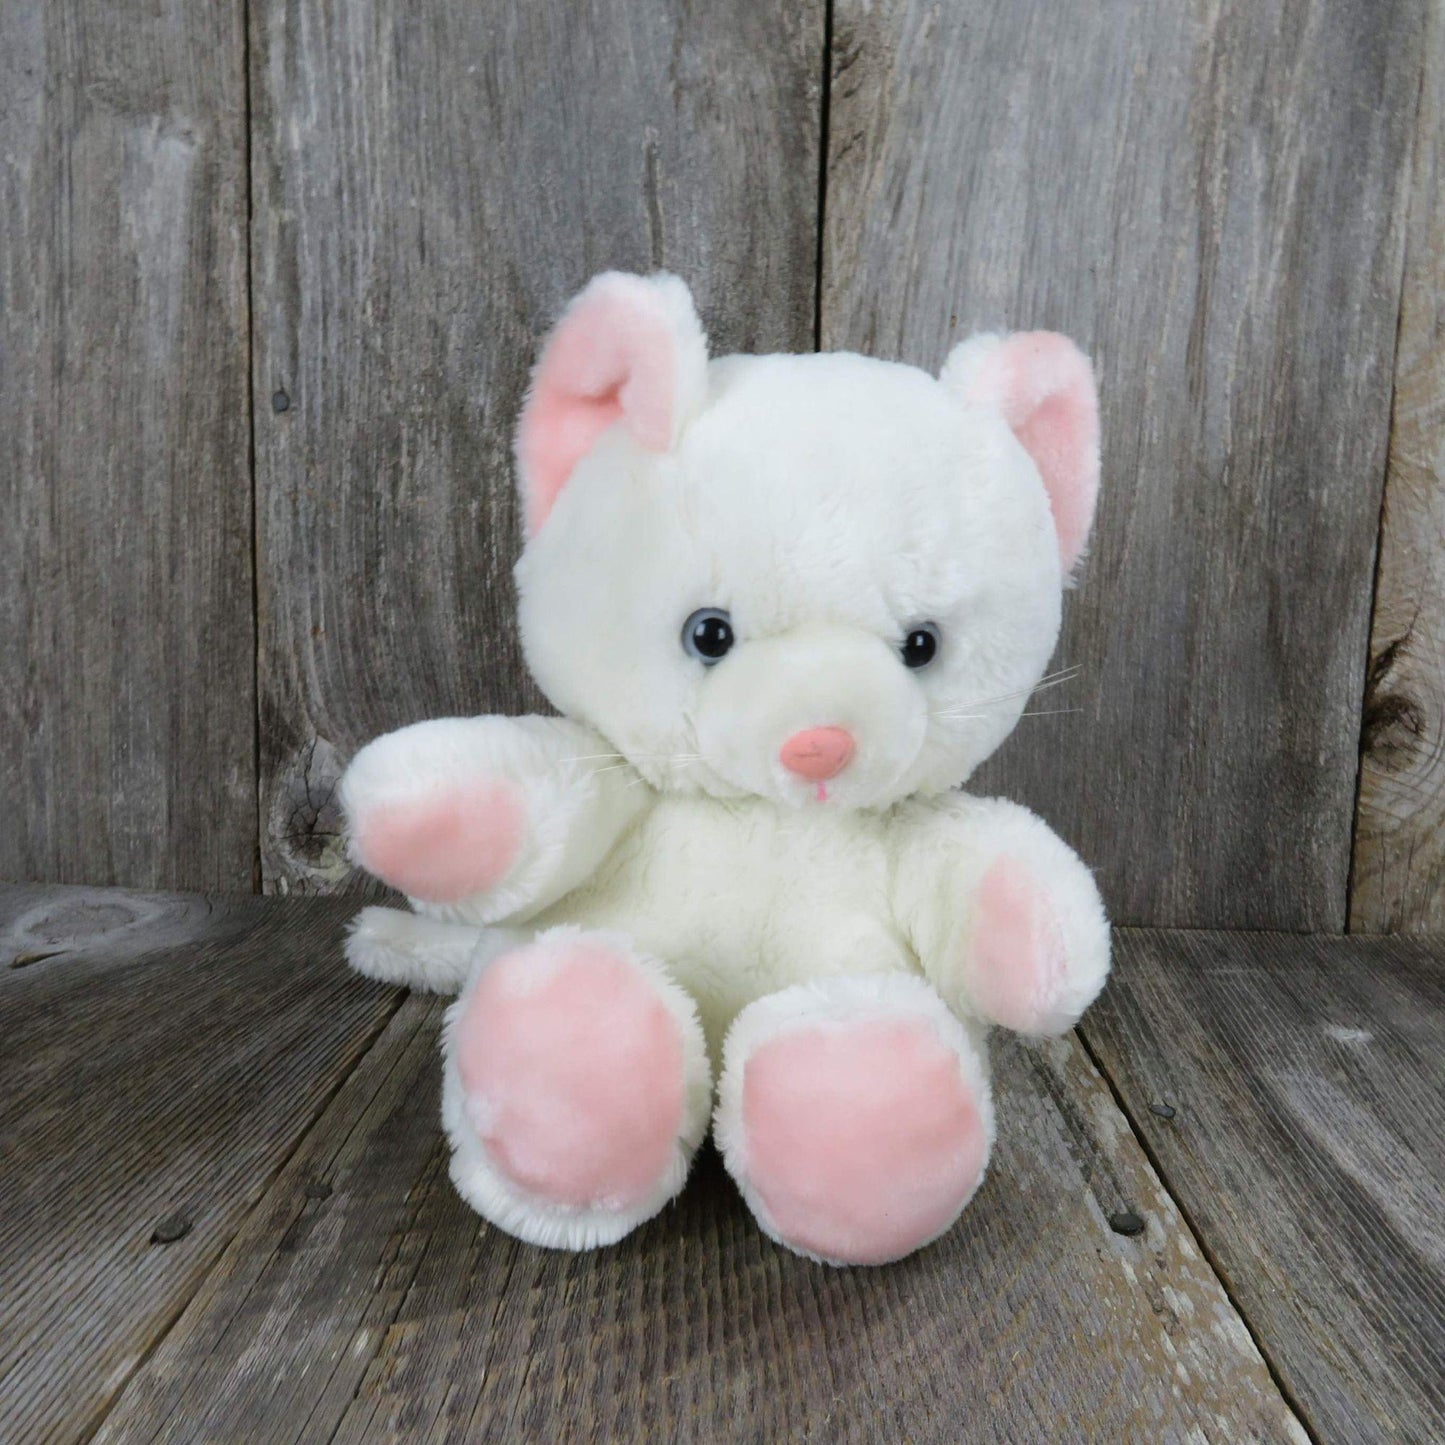 Vintage Cat Plush Newman Importing White Kitten Kitty Stuffed Animal Pink Nose Toy Doll 9 Inch Made in Korea